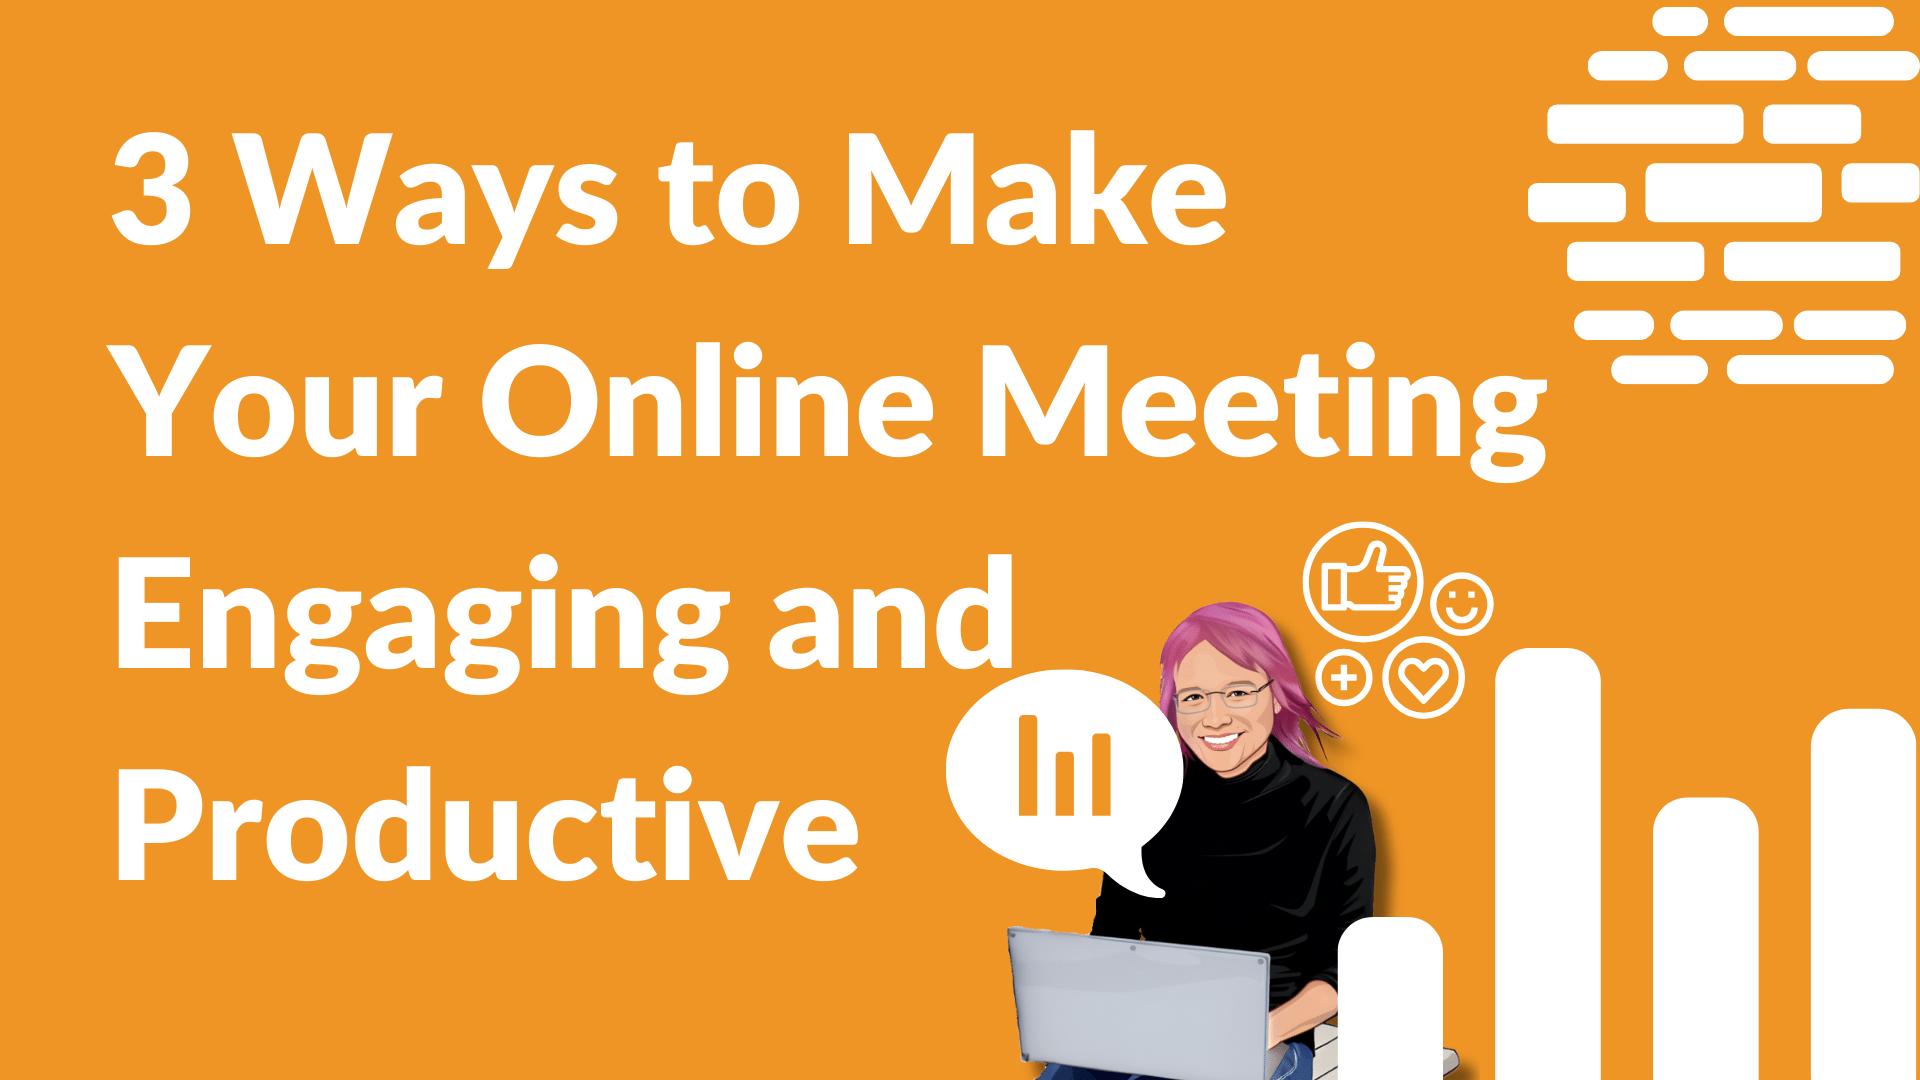 3 Ways to Make Your Online Meetings Engaging and Productive with Polls